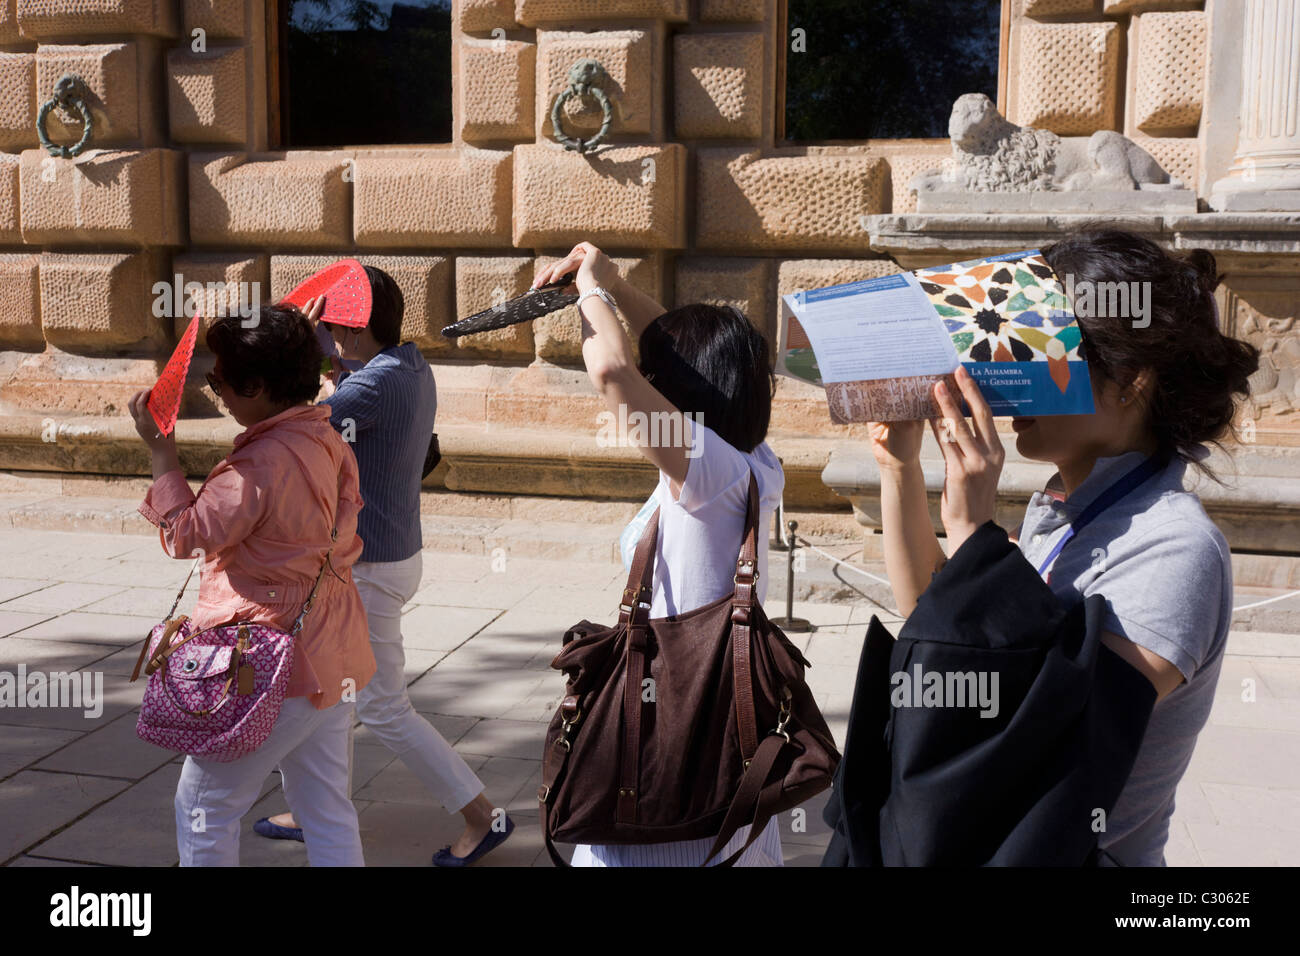 Two women tourists from Asia walk in the sunshine at Alhambra, both holding cameras. Stock Photo